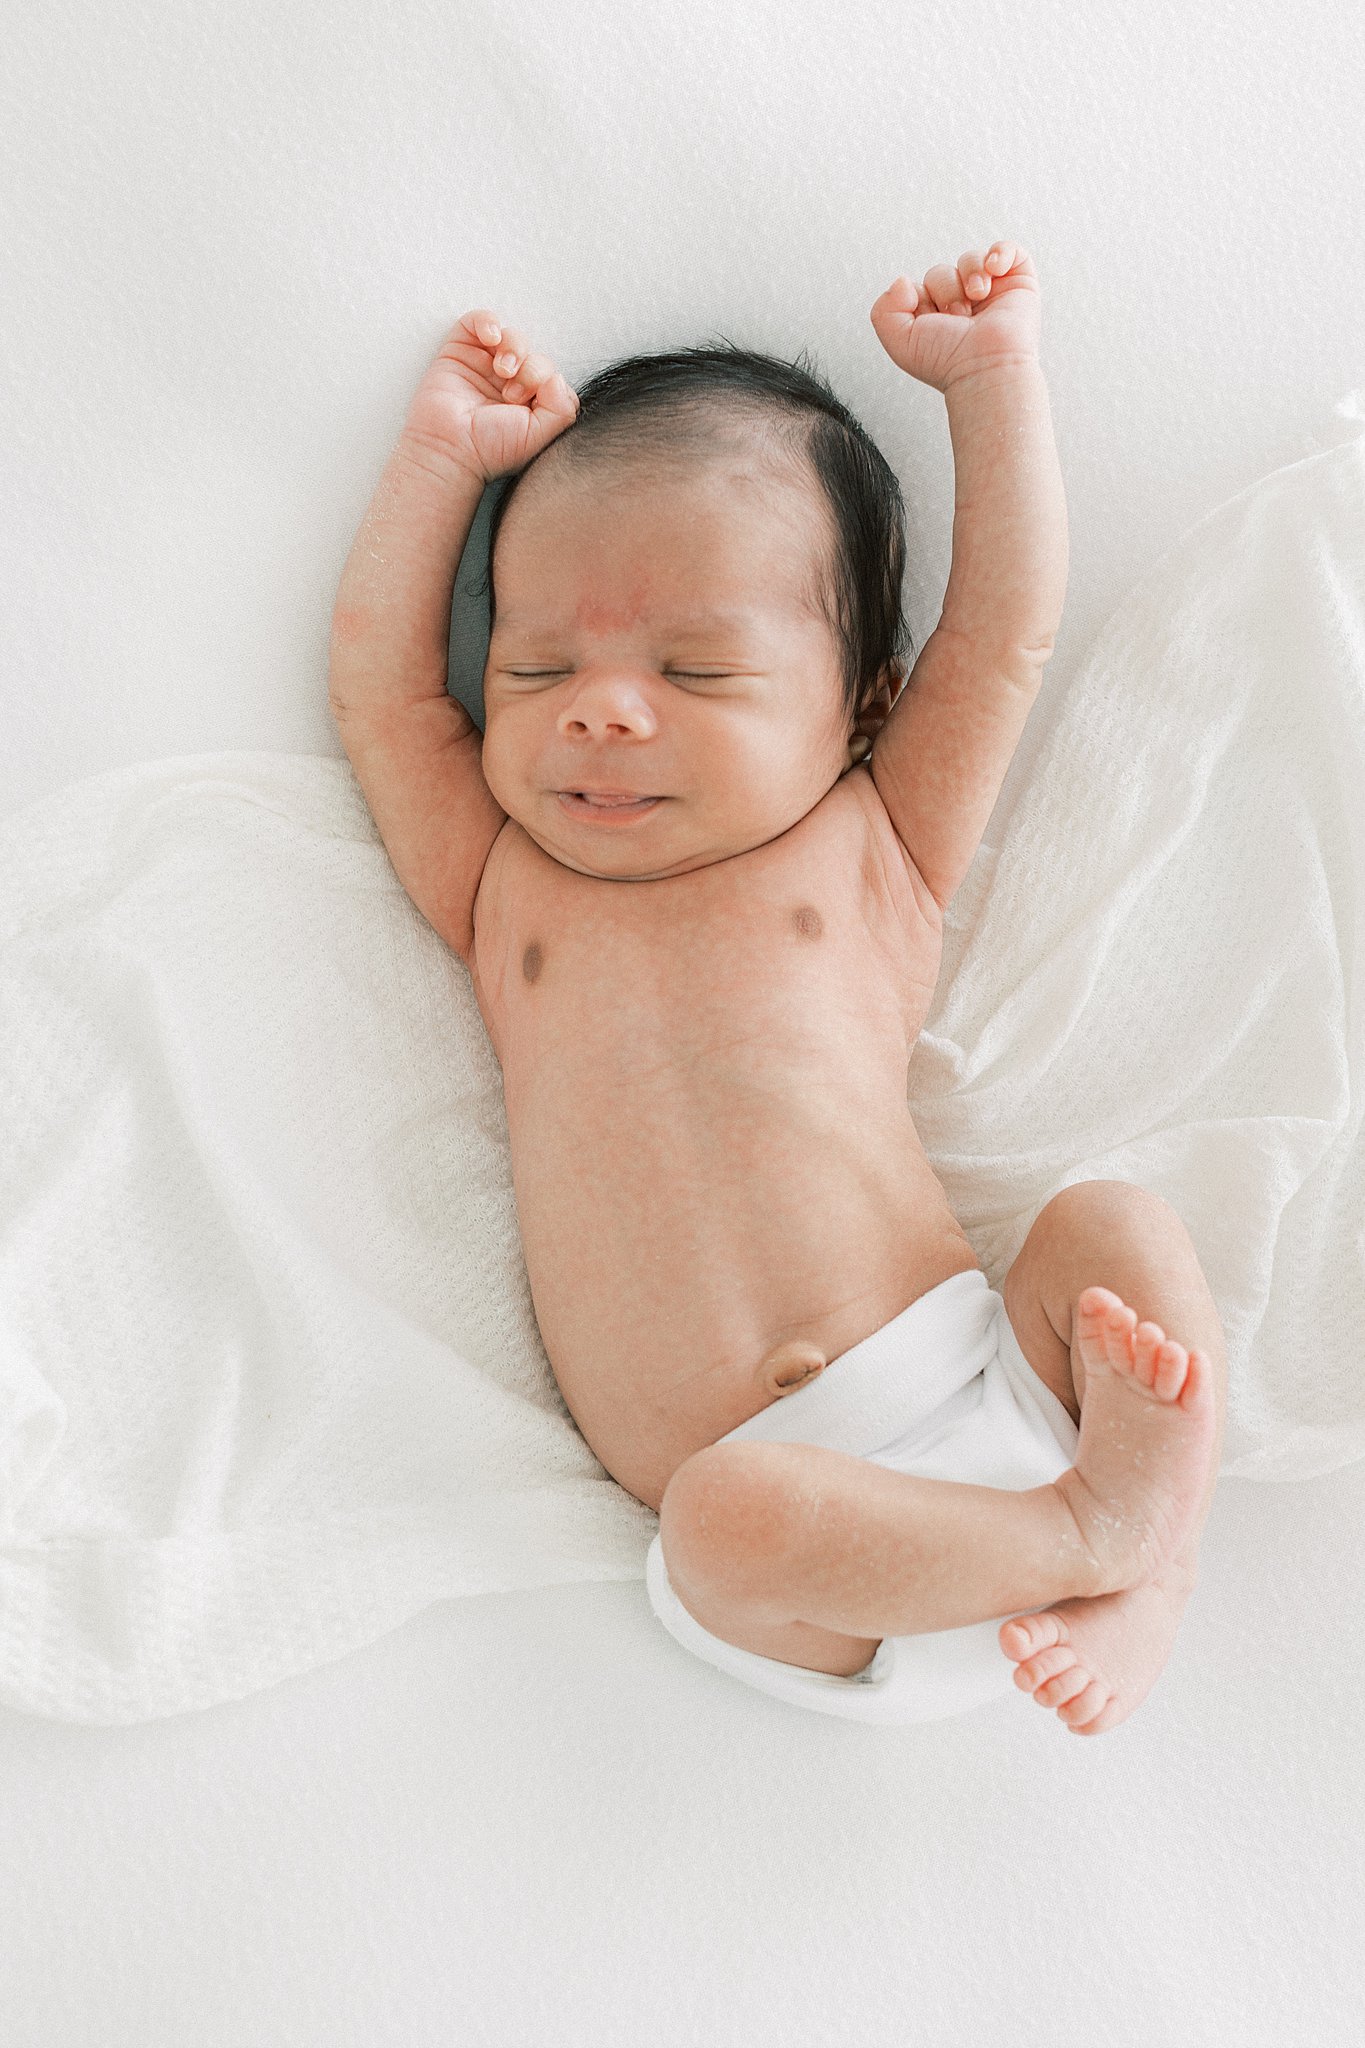 A newborn baby stretches it's arms way above it's head on a white bed baby bliss Dallas